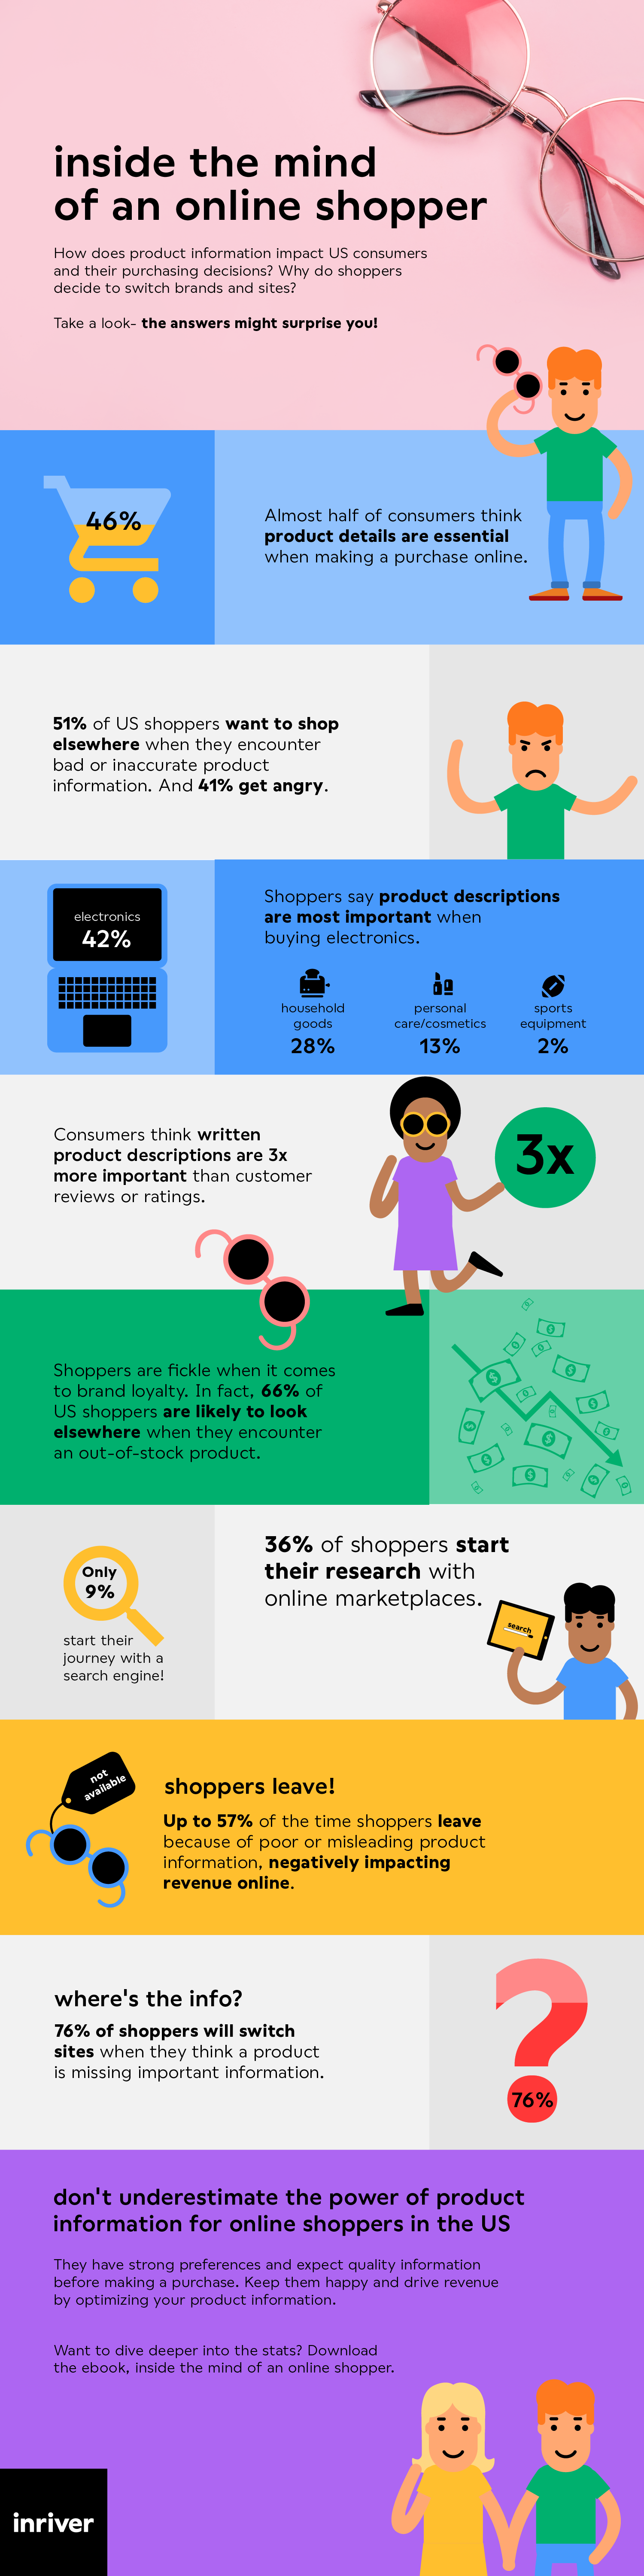 Inside the mind of an online shopper infographic